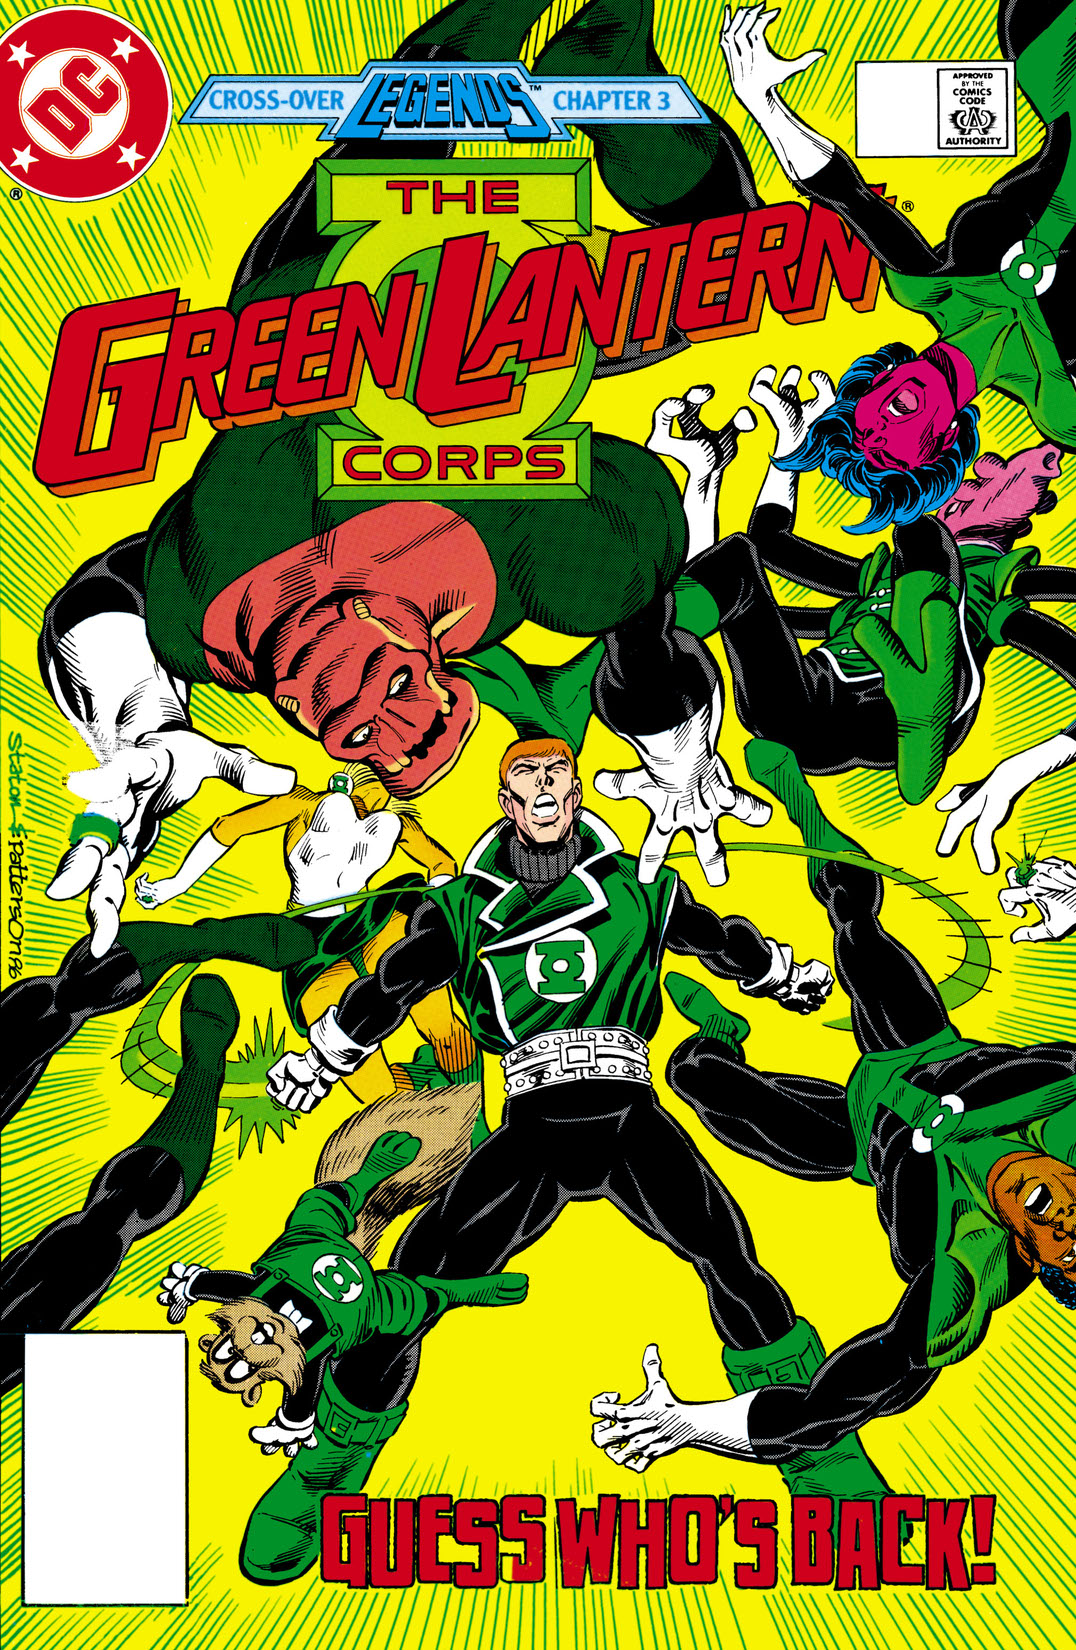 Green Lantern Corps (1986-) #207 preview images